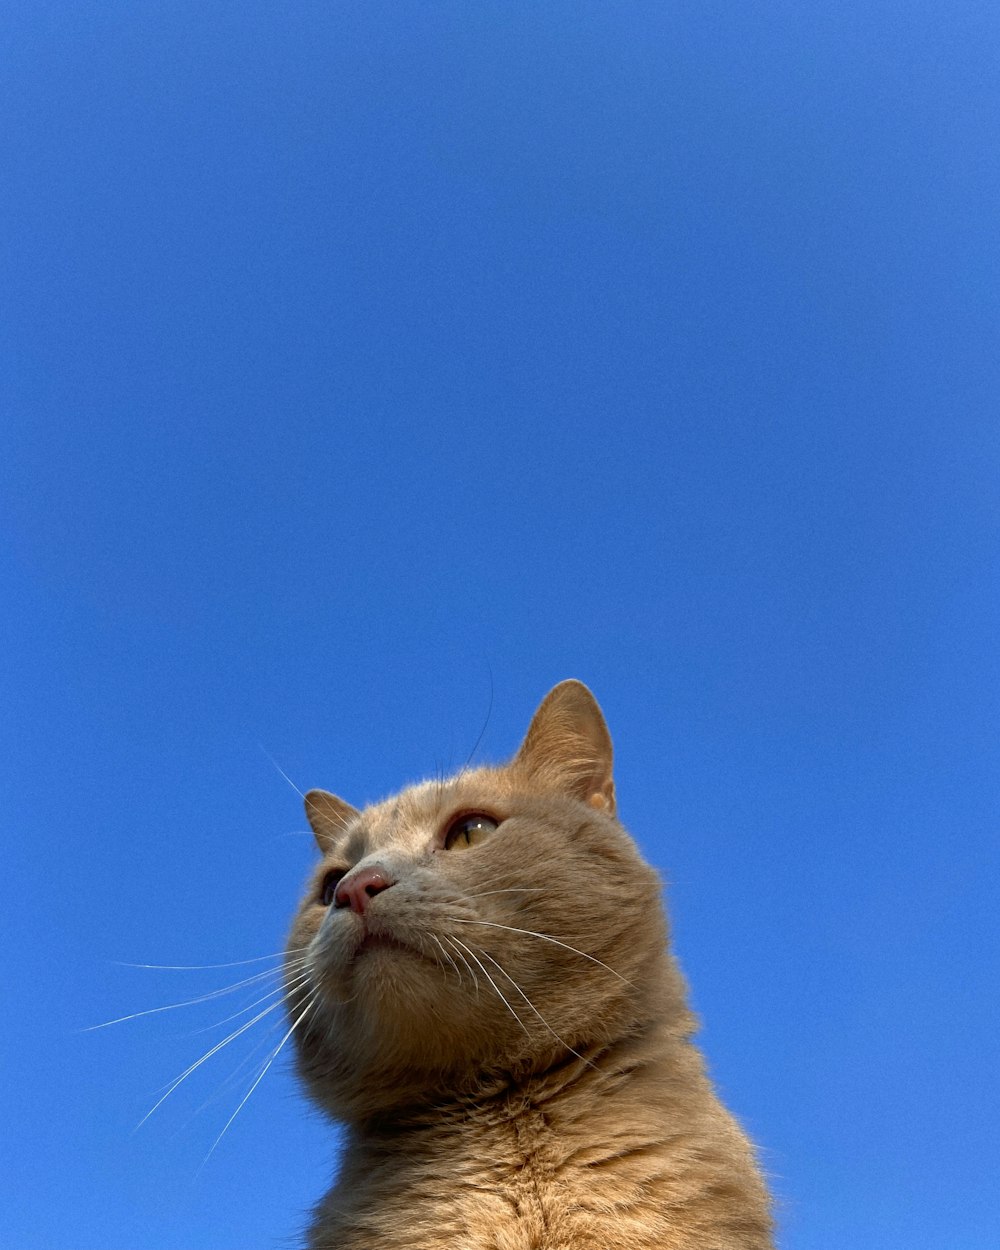 a close up of a cat with a blue sky in the background